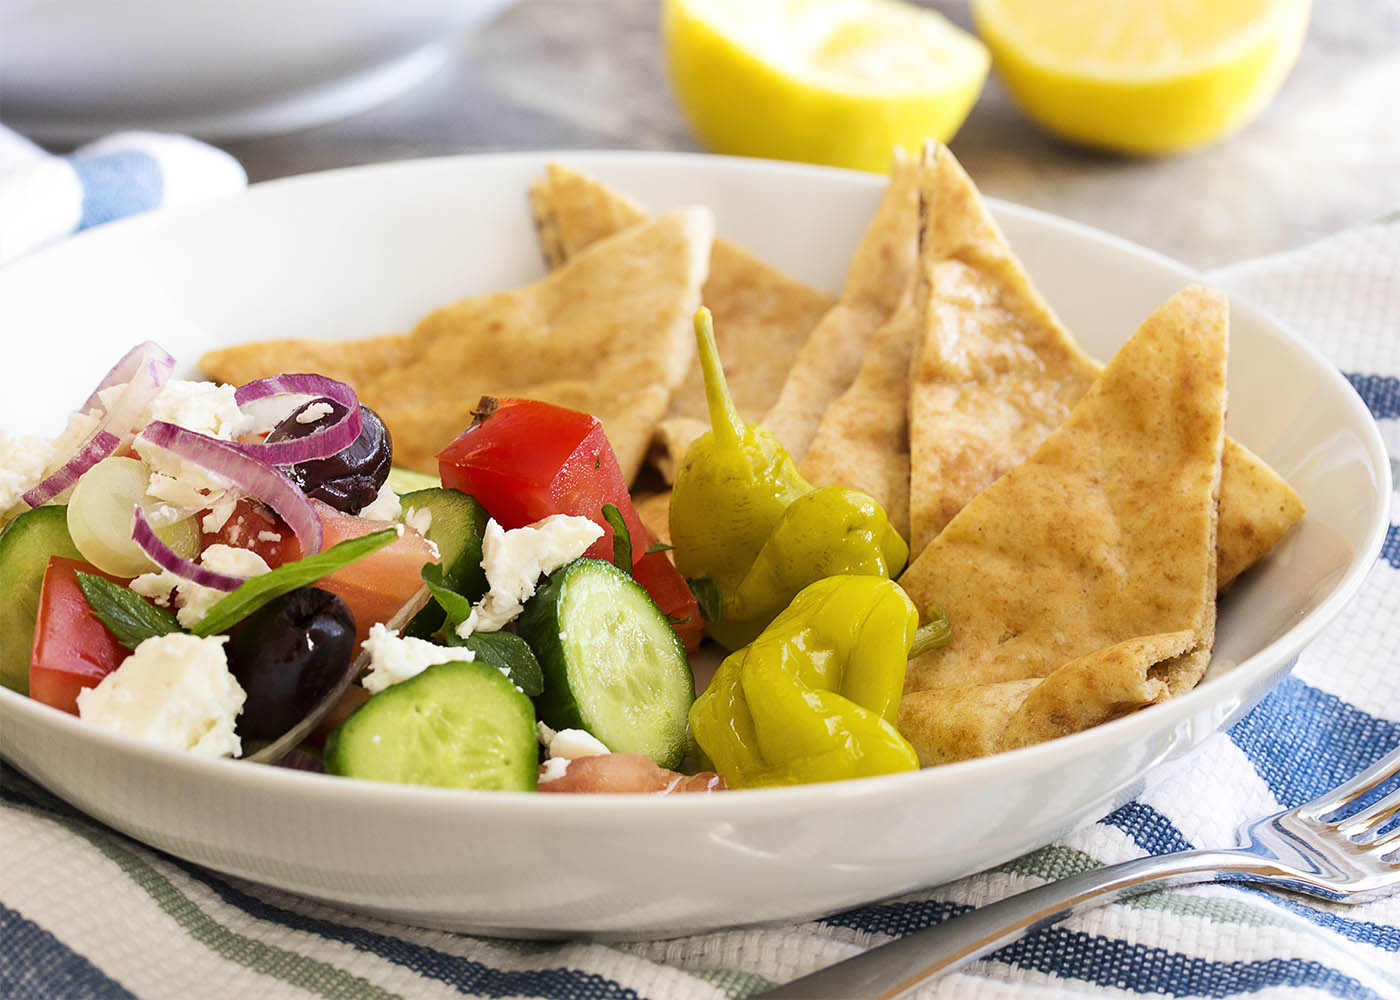 Greek Chopped Salad - Greek chopped salad is a great, healthy Mediterranean recipe full of tomatoes, cucumbers, onion, olives, and feta cheese. I also add in some fresh herbs and toss it all with a lemony dressing. | justalittlebitofbacon.com